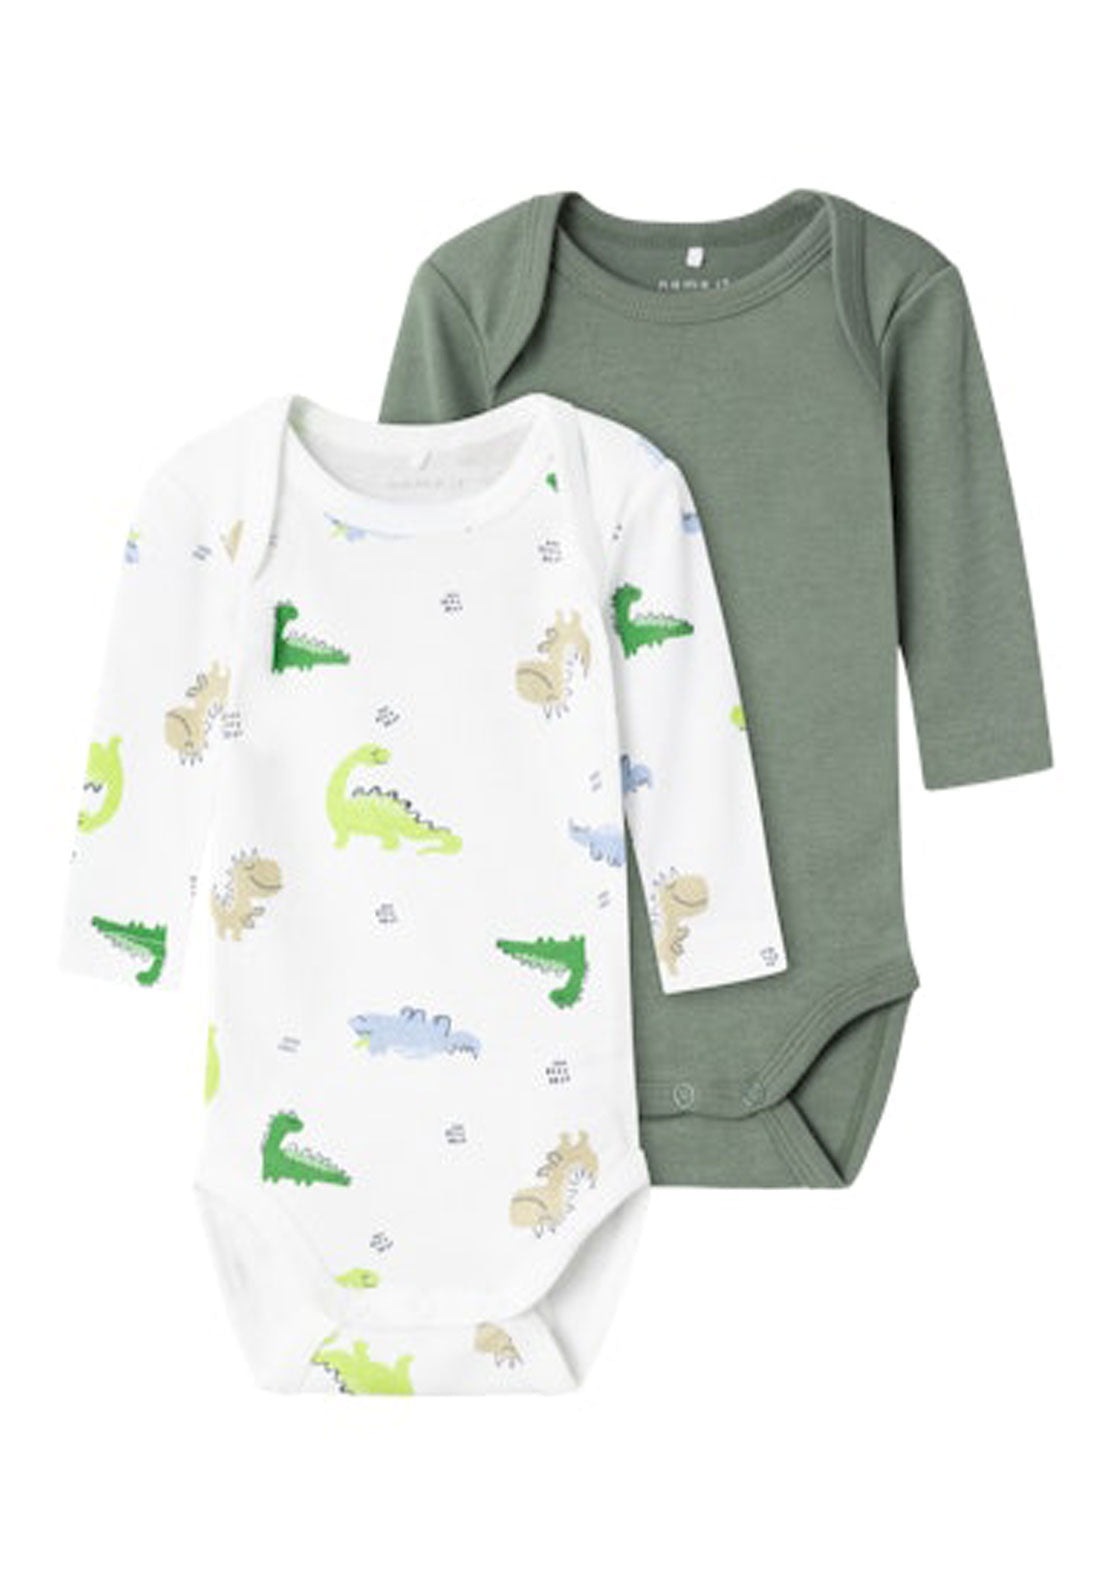 Name It 2 Pack Long Sleeve Dino Bodysuit 1 Shaws Department Stores